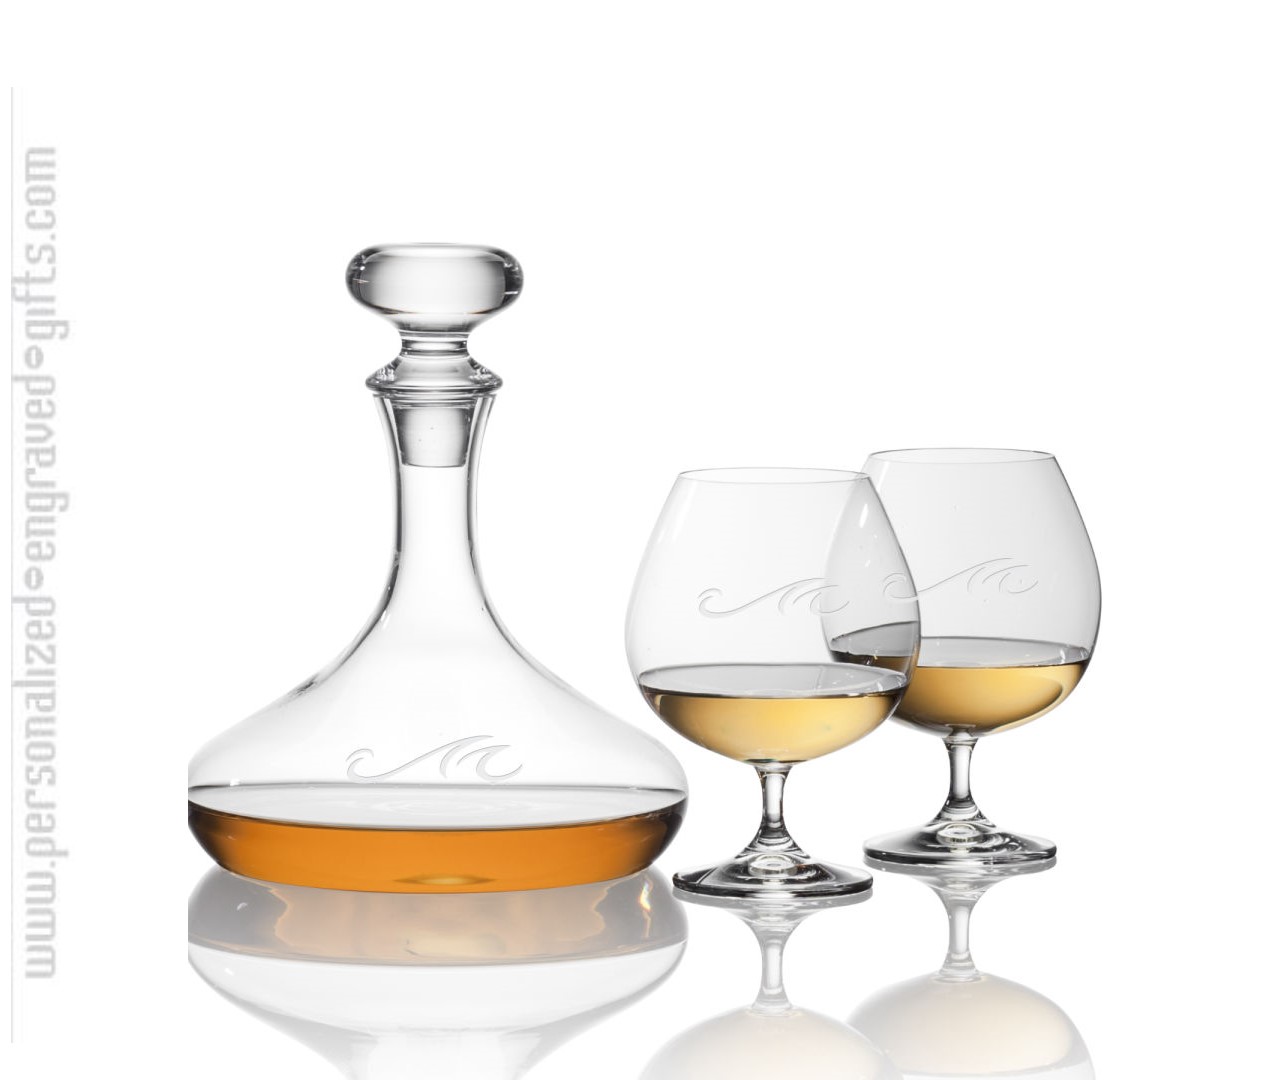 Brandy Gift Set with Long Neck Decanter and 2 Brandy Glasses